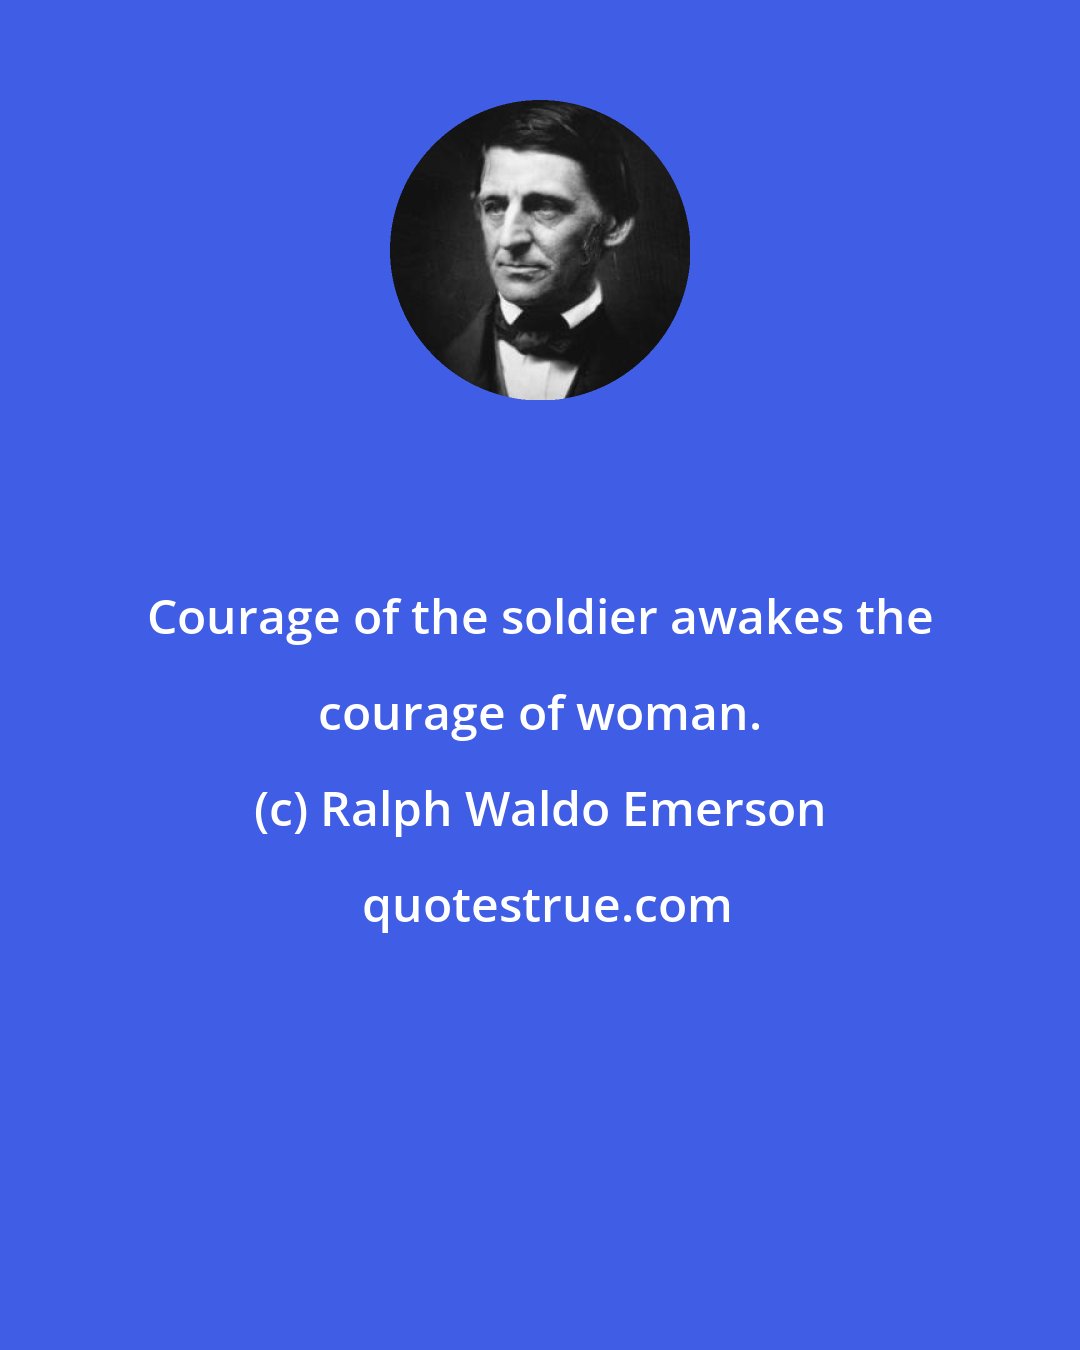 Ralph Waldo Emerson: Courage of the soldier awakes the courage of woman.